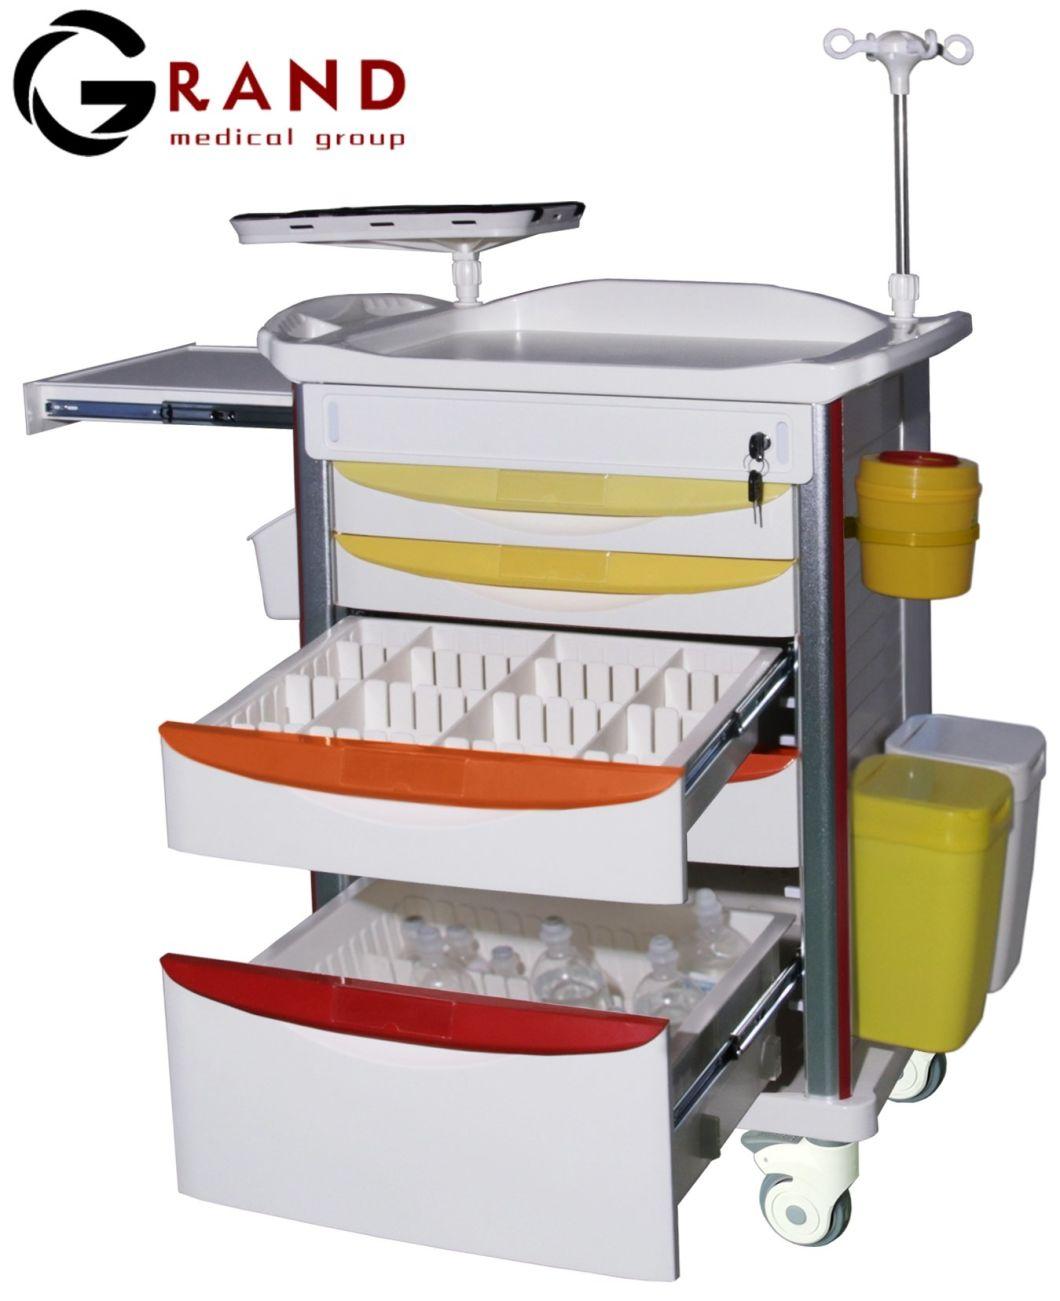 High Quality Factory Price Hospital Emergency Trolley Luxury Medical Cart with Wheels